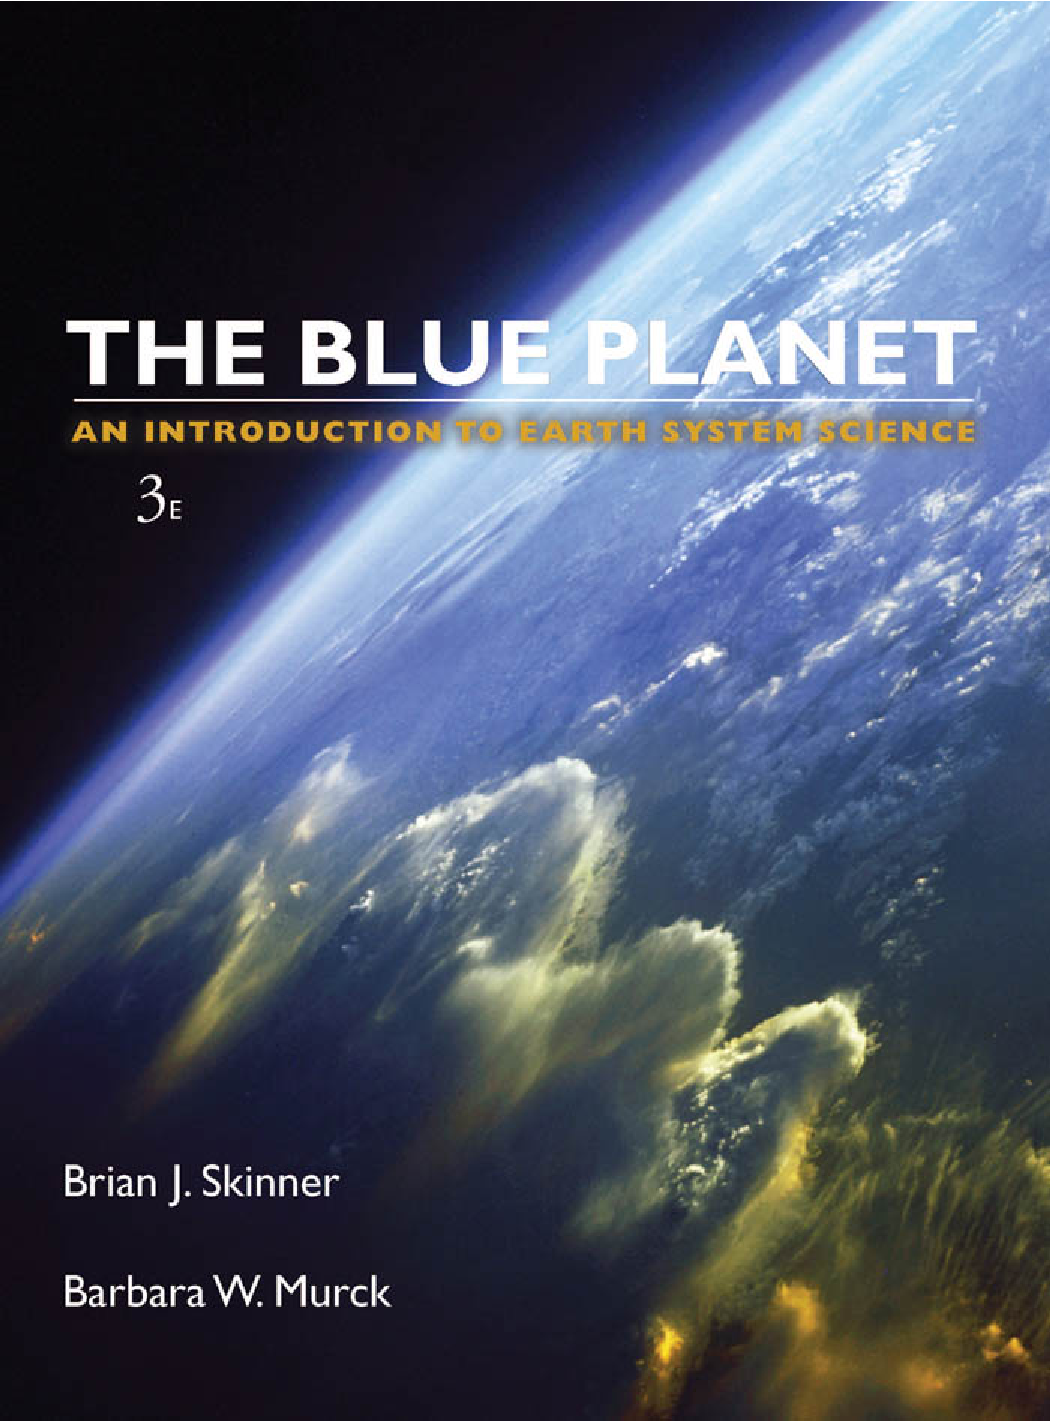 The blue planet : an introduction to earth system science